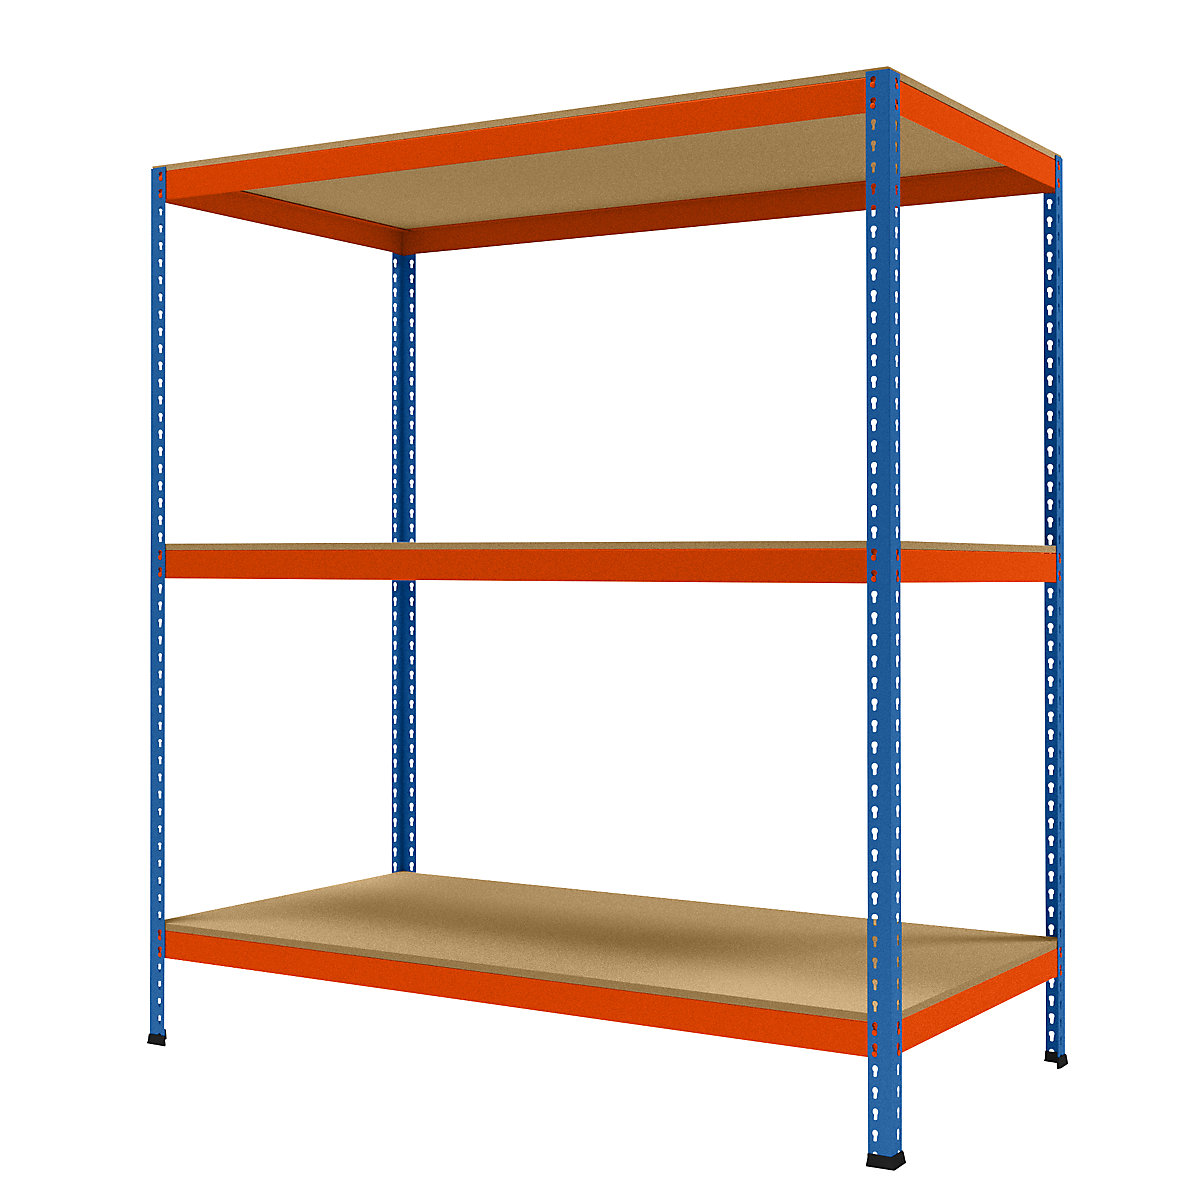 Wide span heavy duty shelving, height 1981 mm, overall depth 926 mm, width 1841 mm